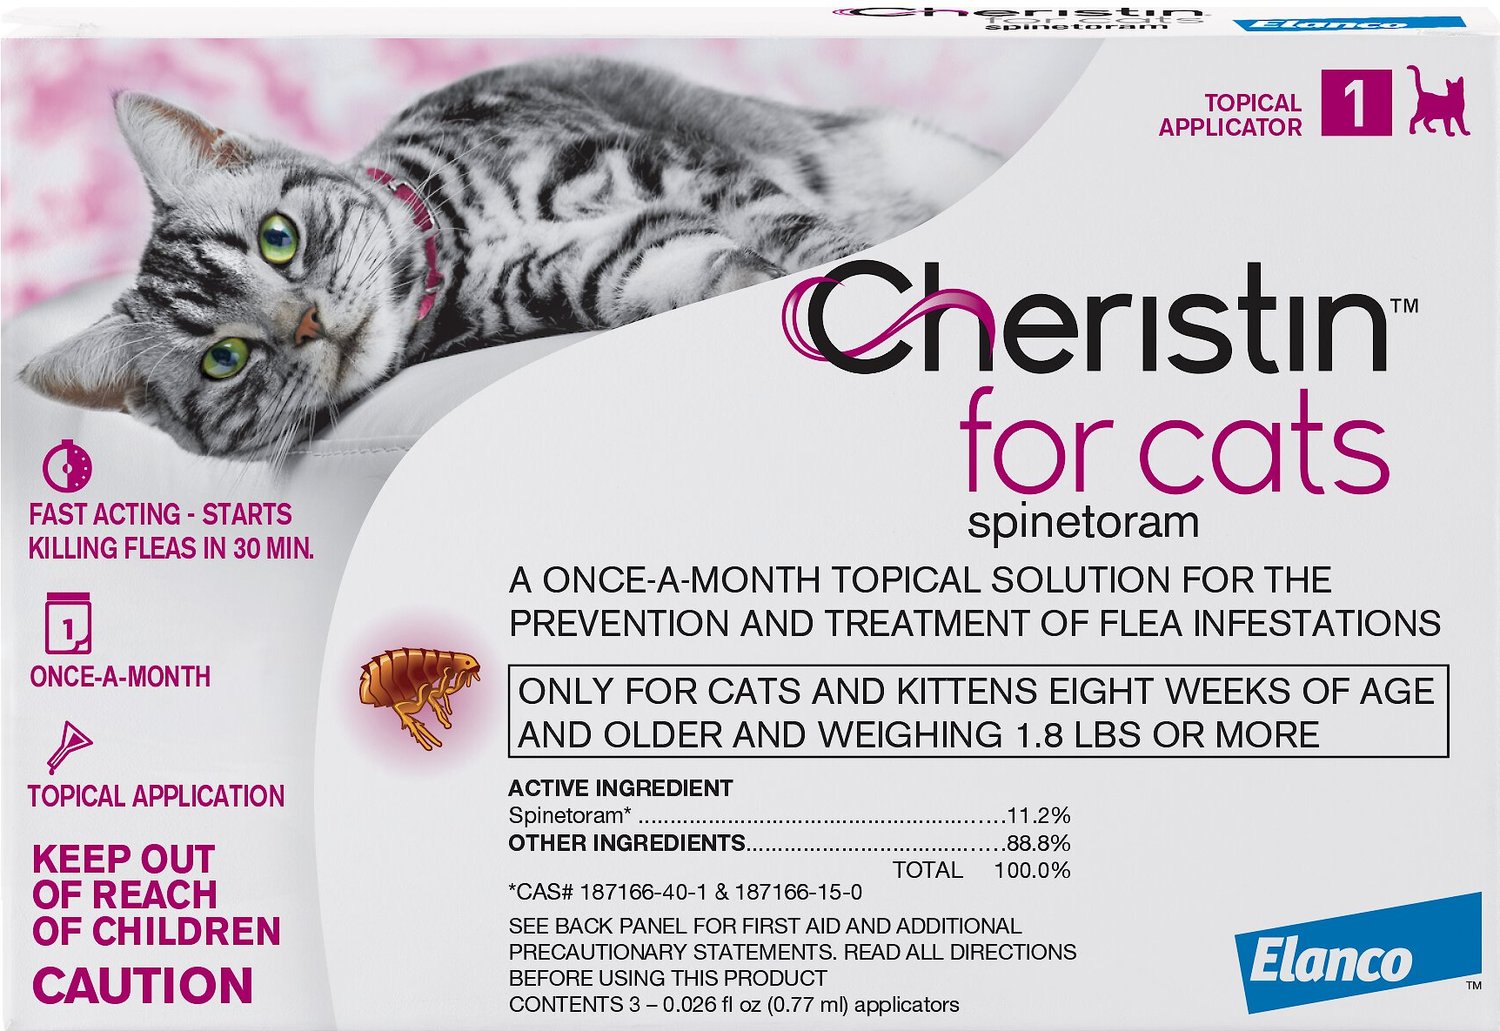 cheristin for cats reviews